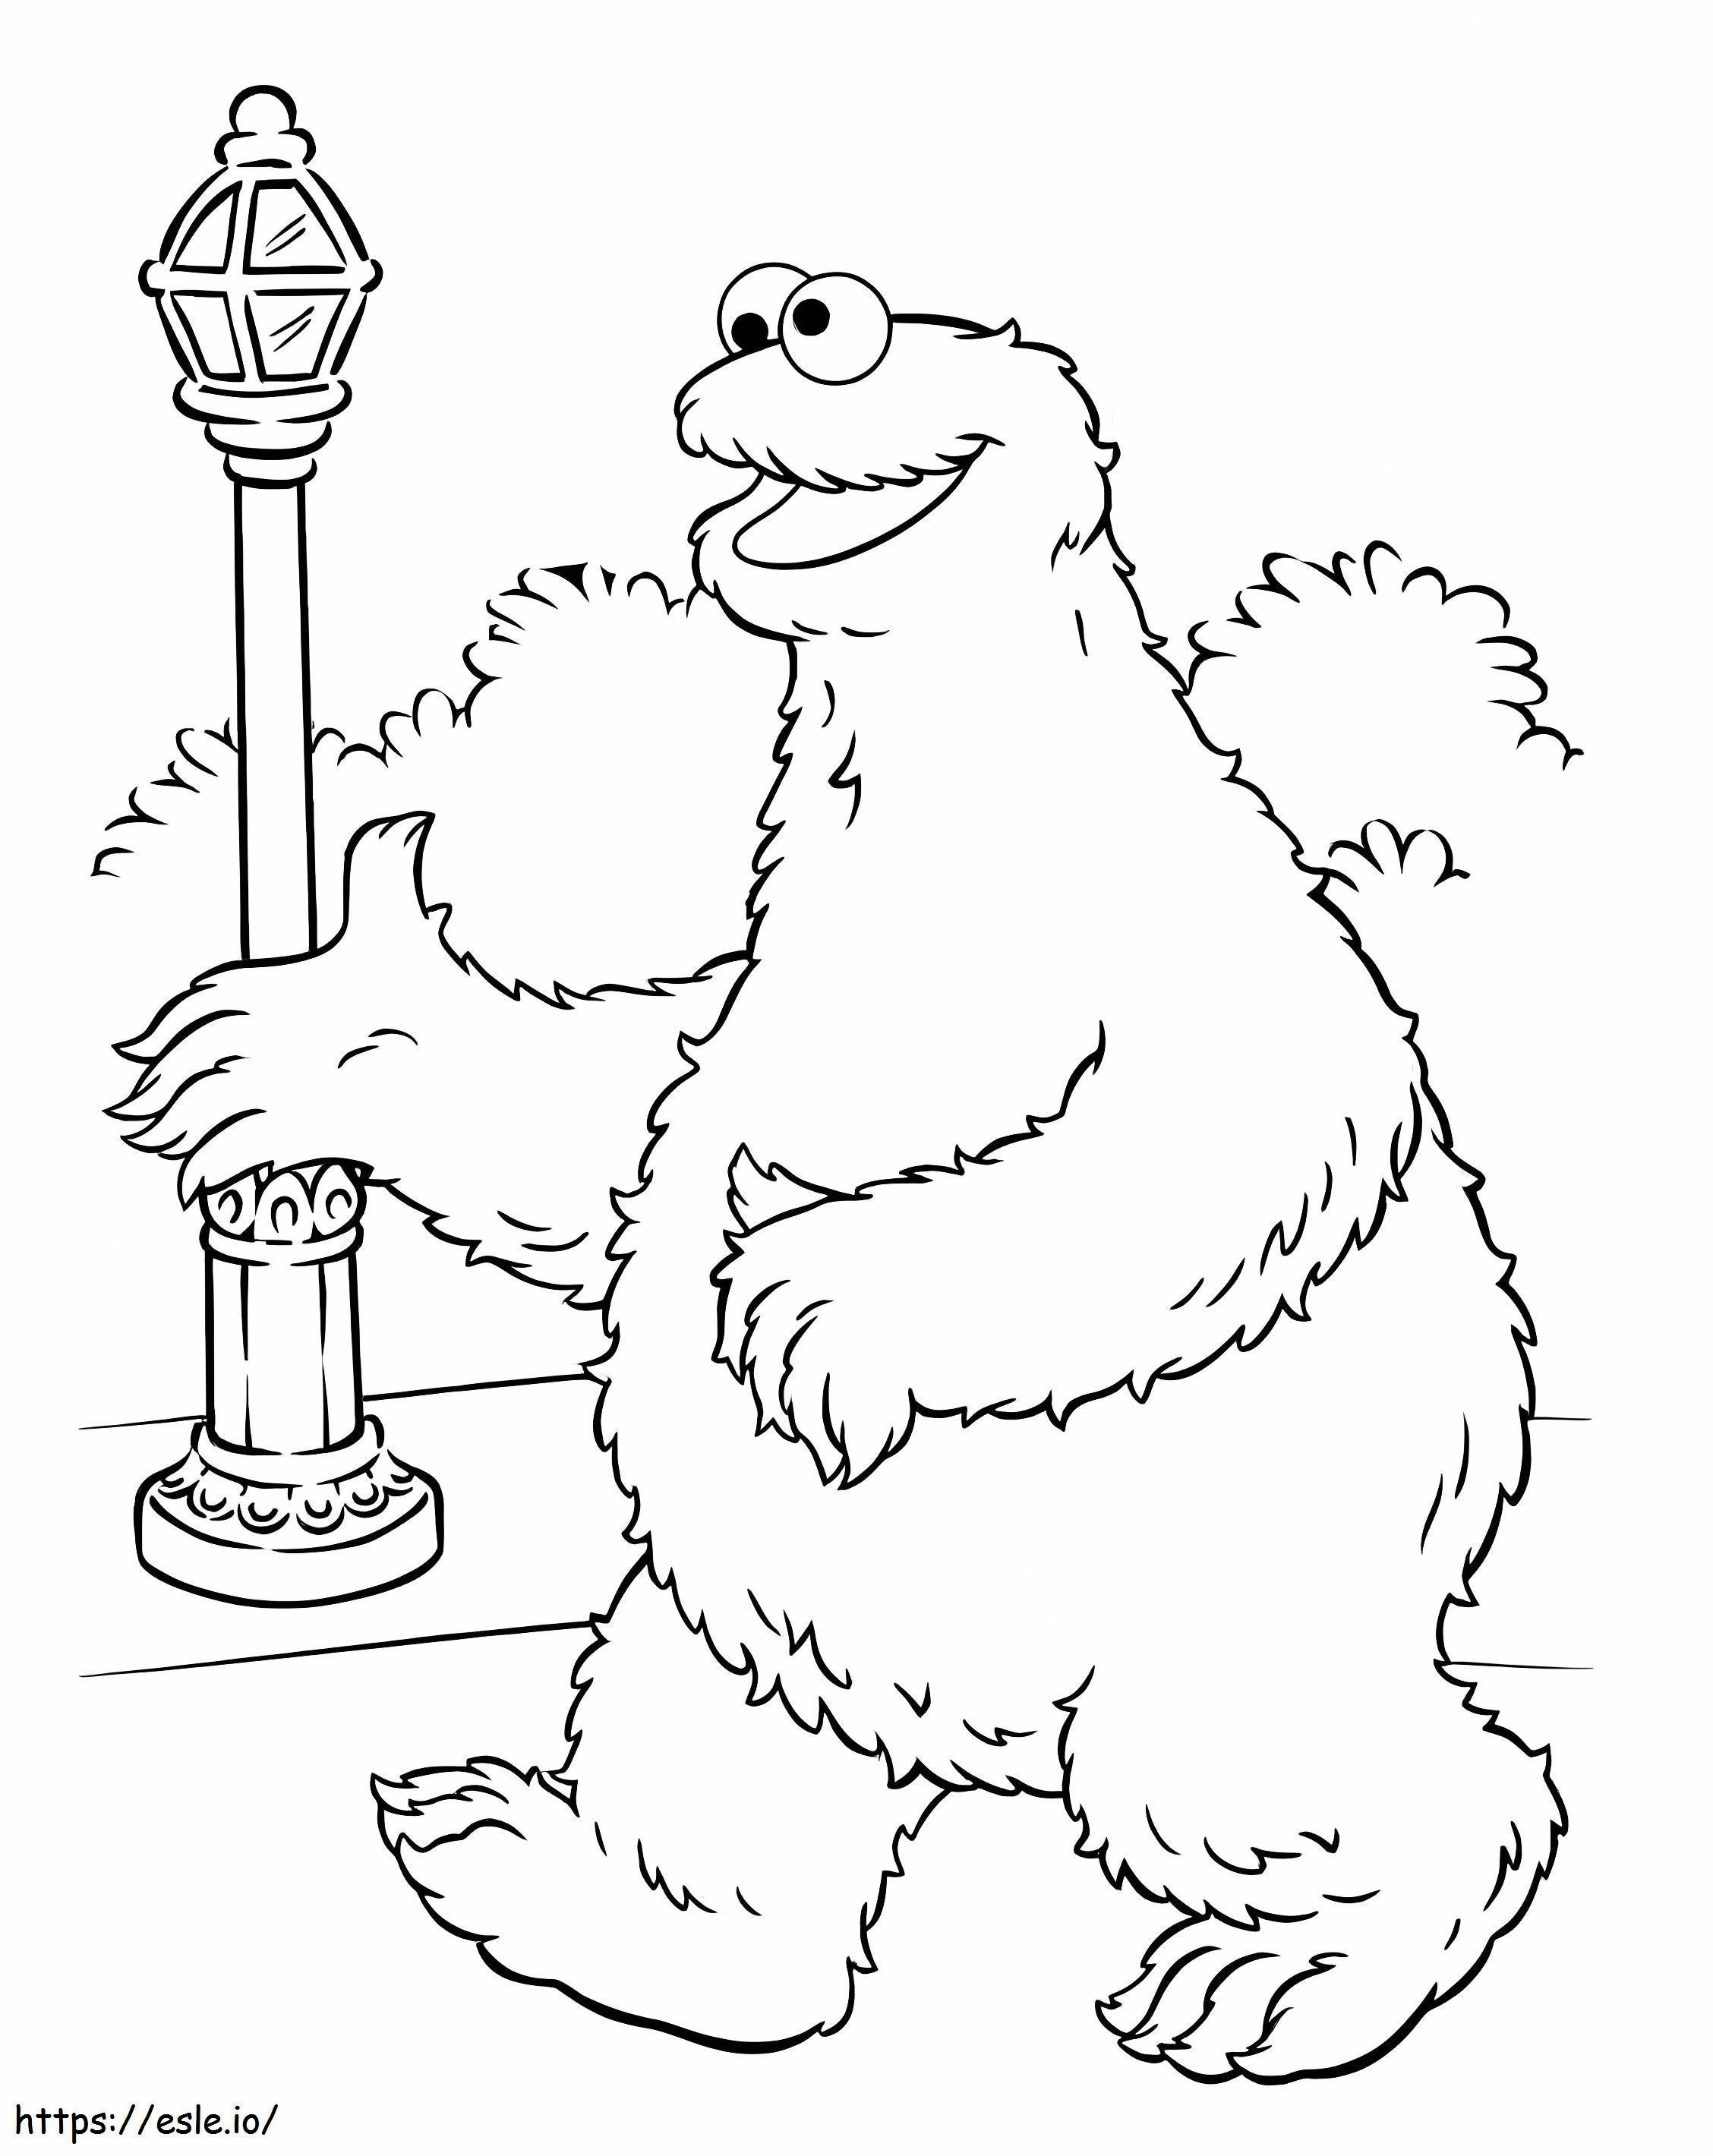 Cookie Monster Walking coloring page